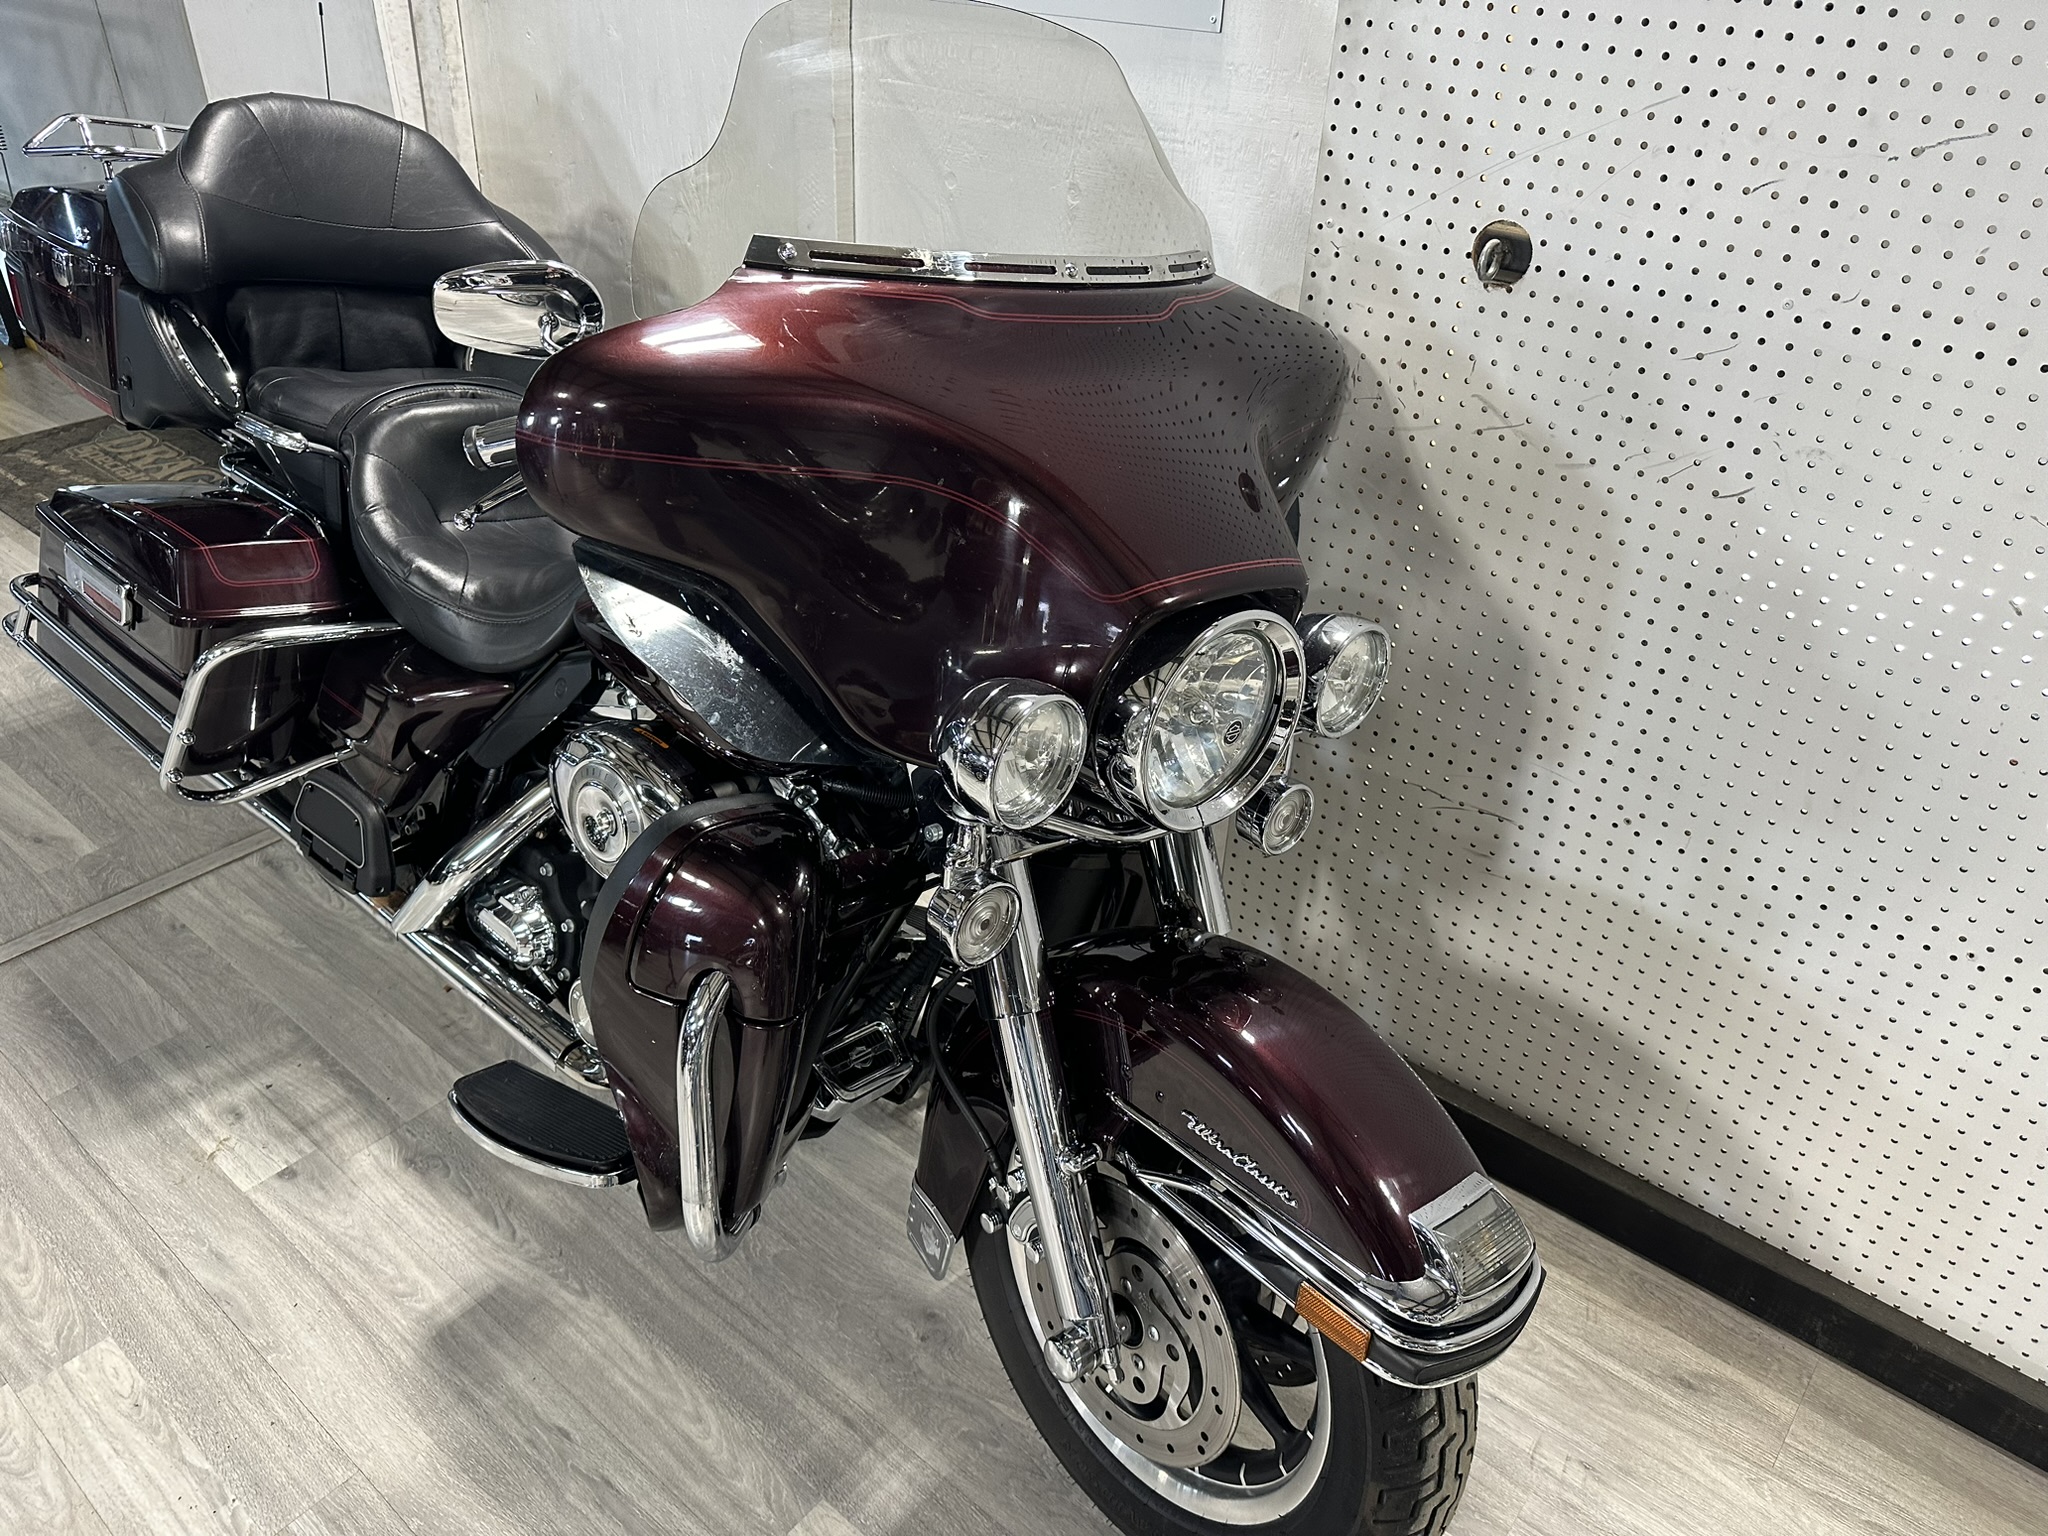 HARLEY DAVIDSON ULTRA CLASSIC FOR SALE ONTARIO